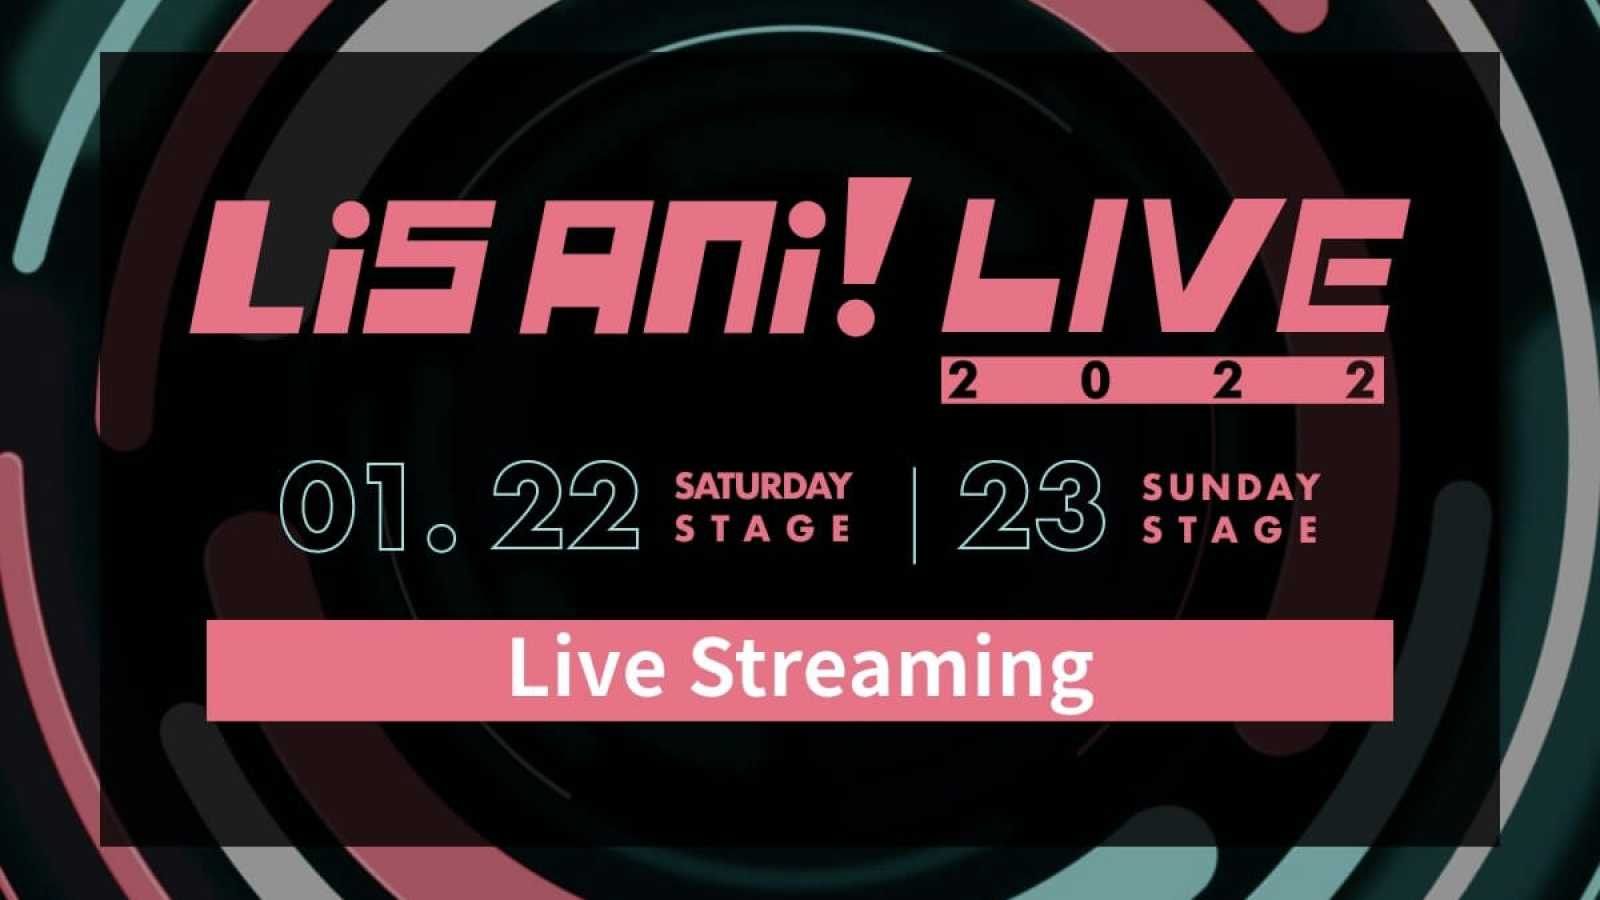 "LisAni!LIVE 2022" to Be Livestreamed in Select Territories © Sony Music. All rights reserved.